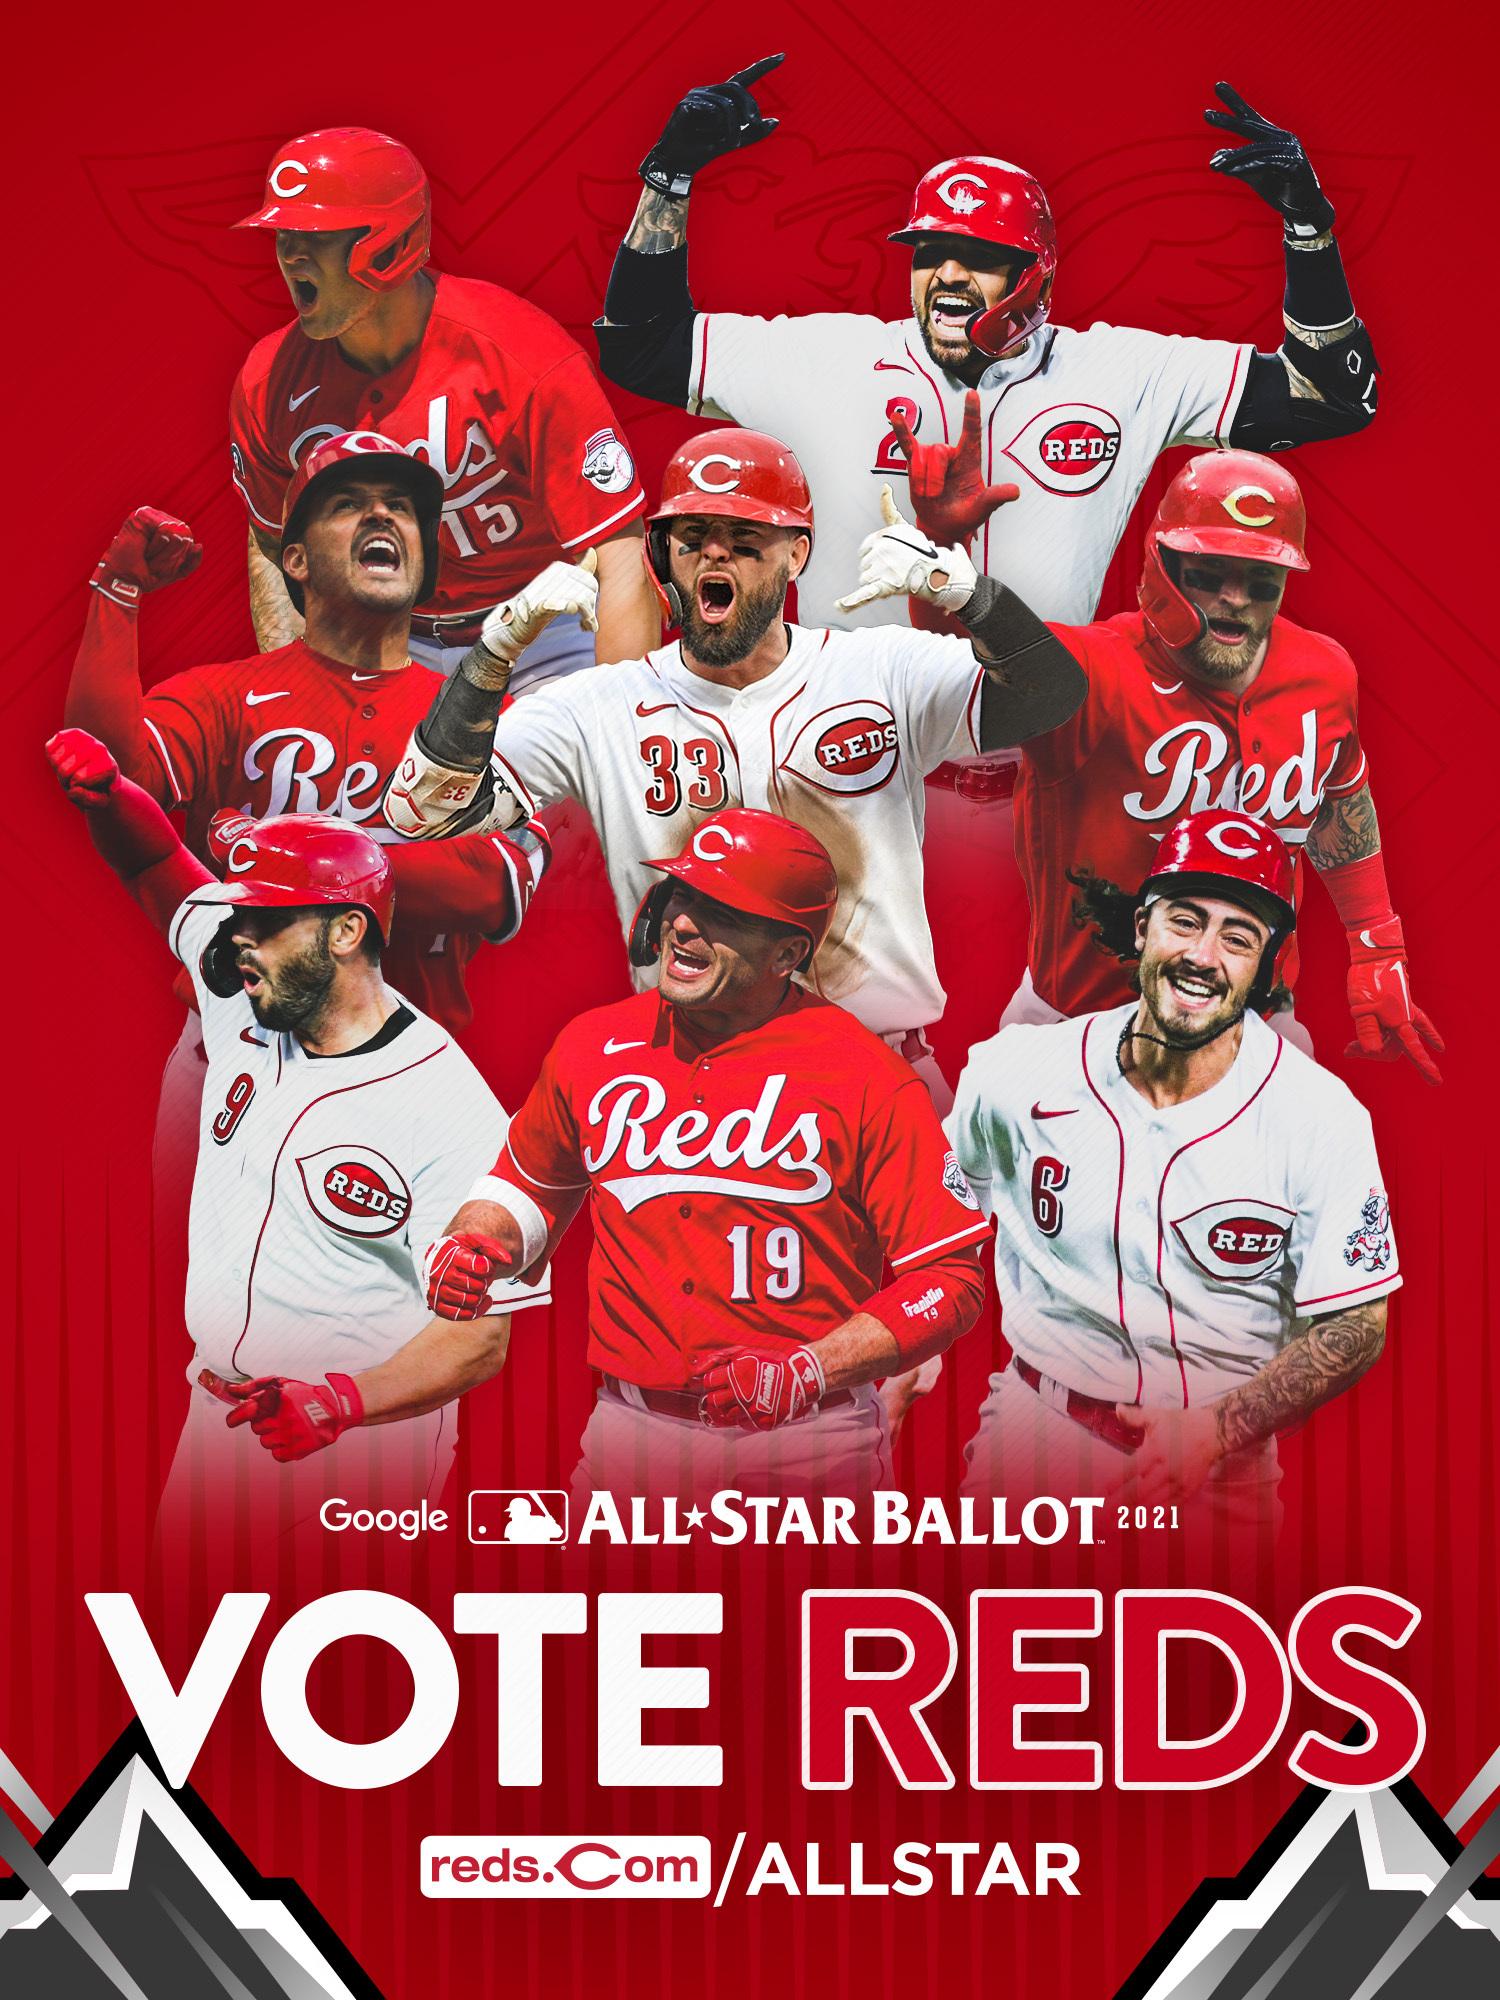 Cincinnati Reds on X: The Reds are 🔥 ℍ𝕆𝕋! 🔥 #VoteReds 5x each